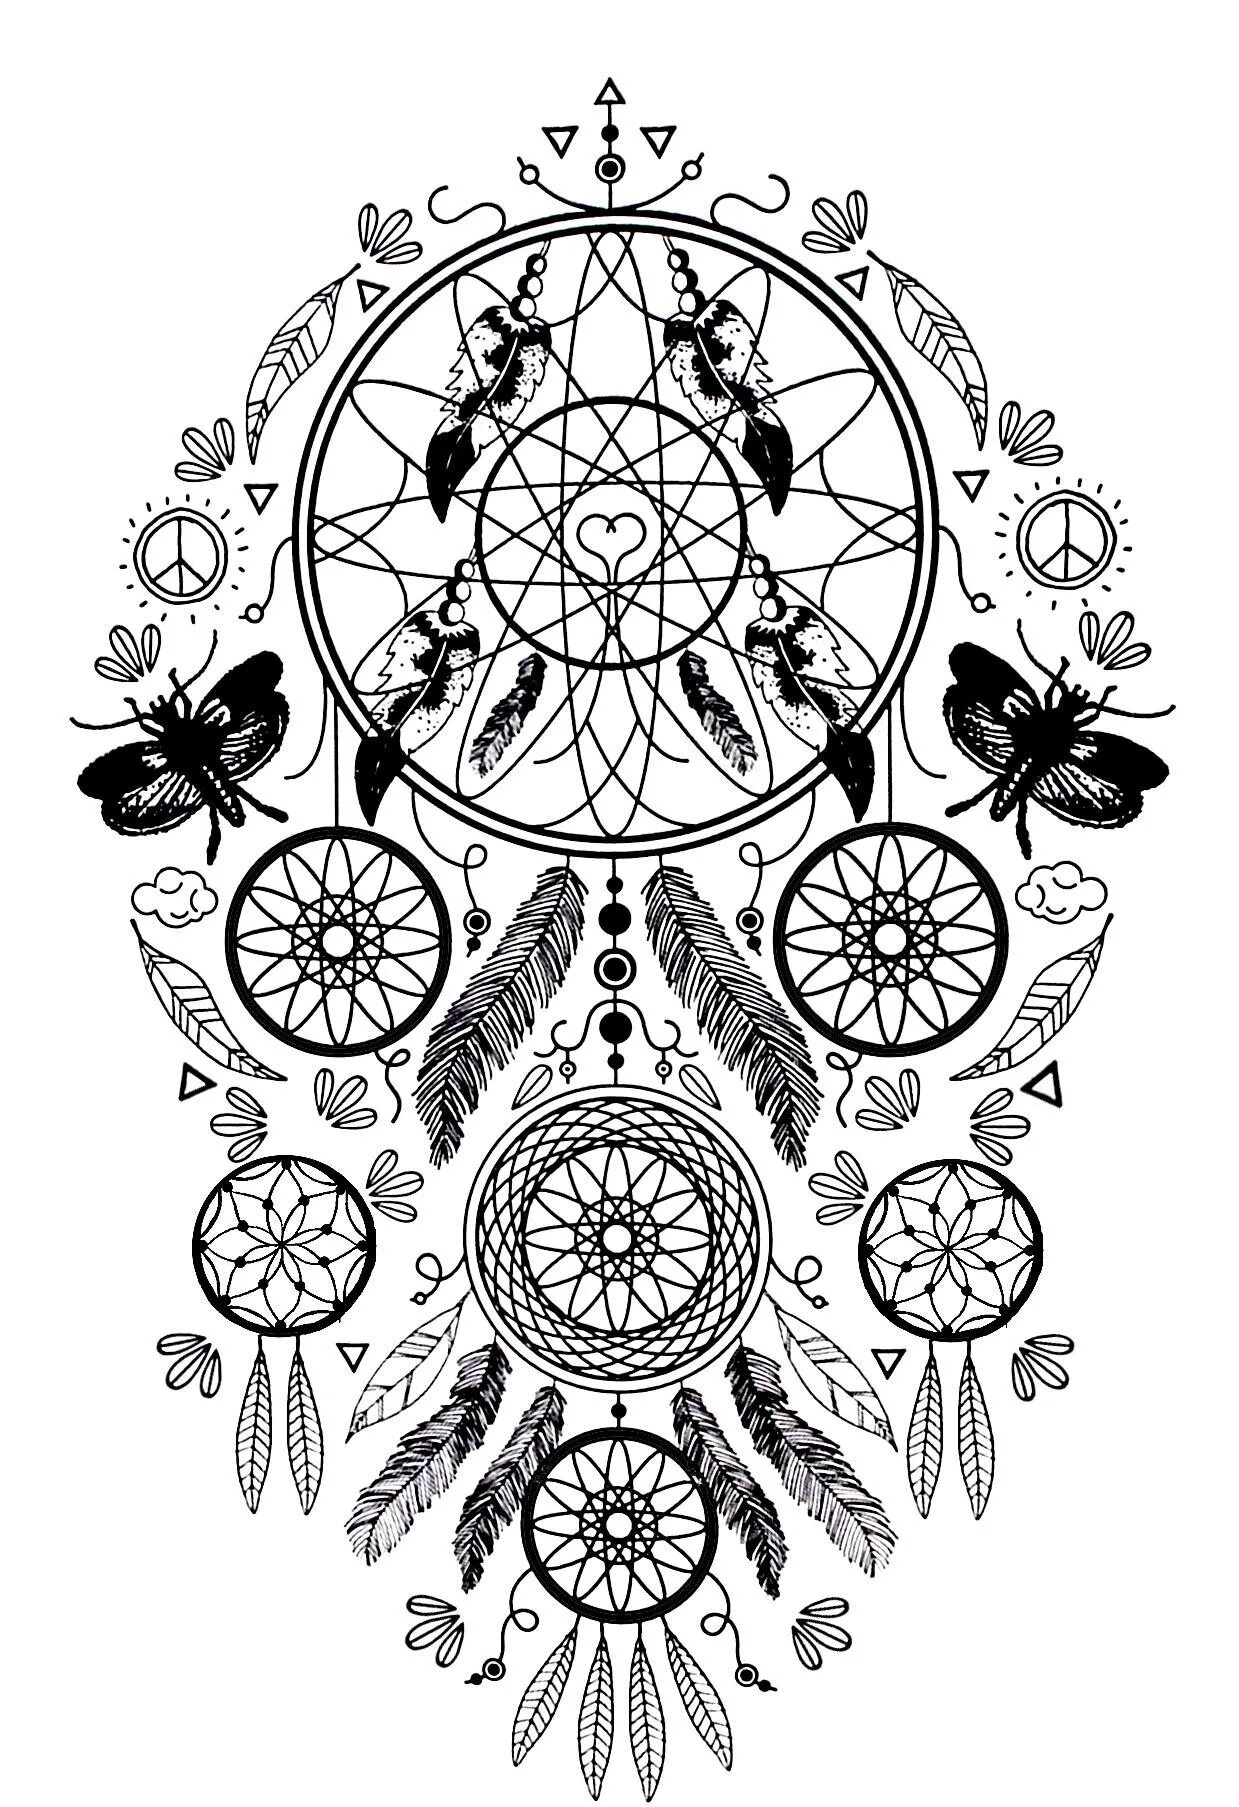 Soothing coloring book antistress dream catcher